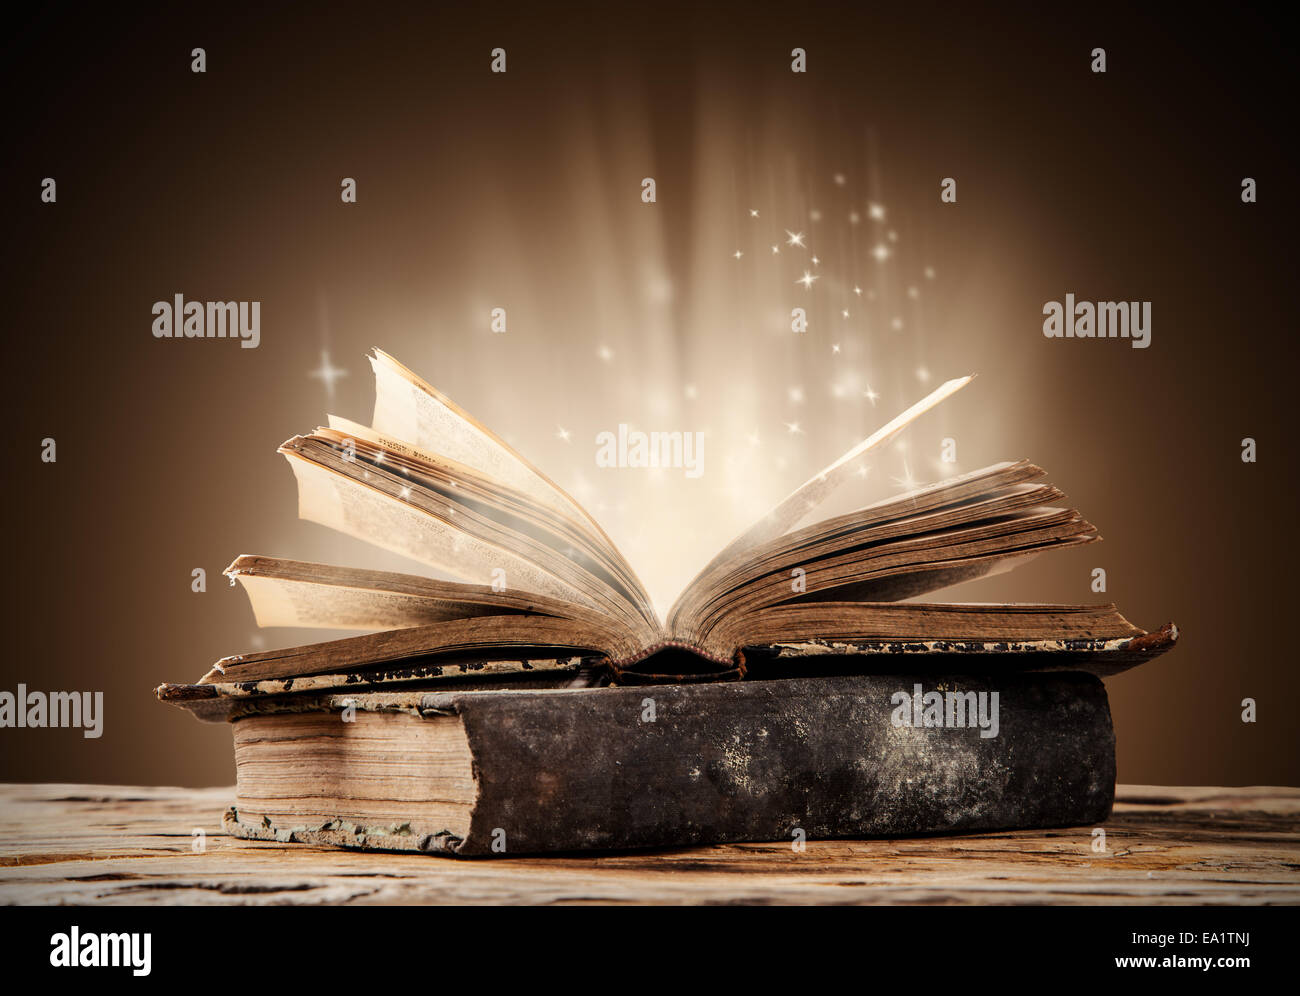 Old books on wooden planks with blur shimmer background Stock Photo